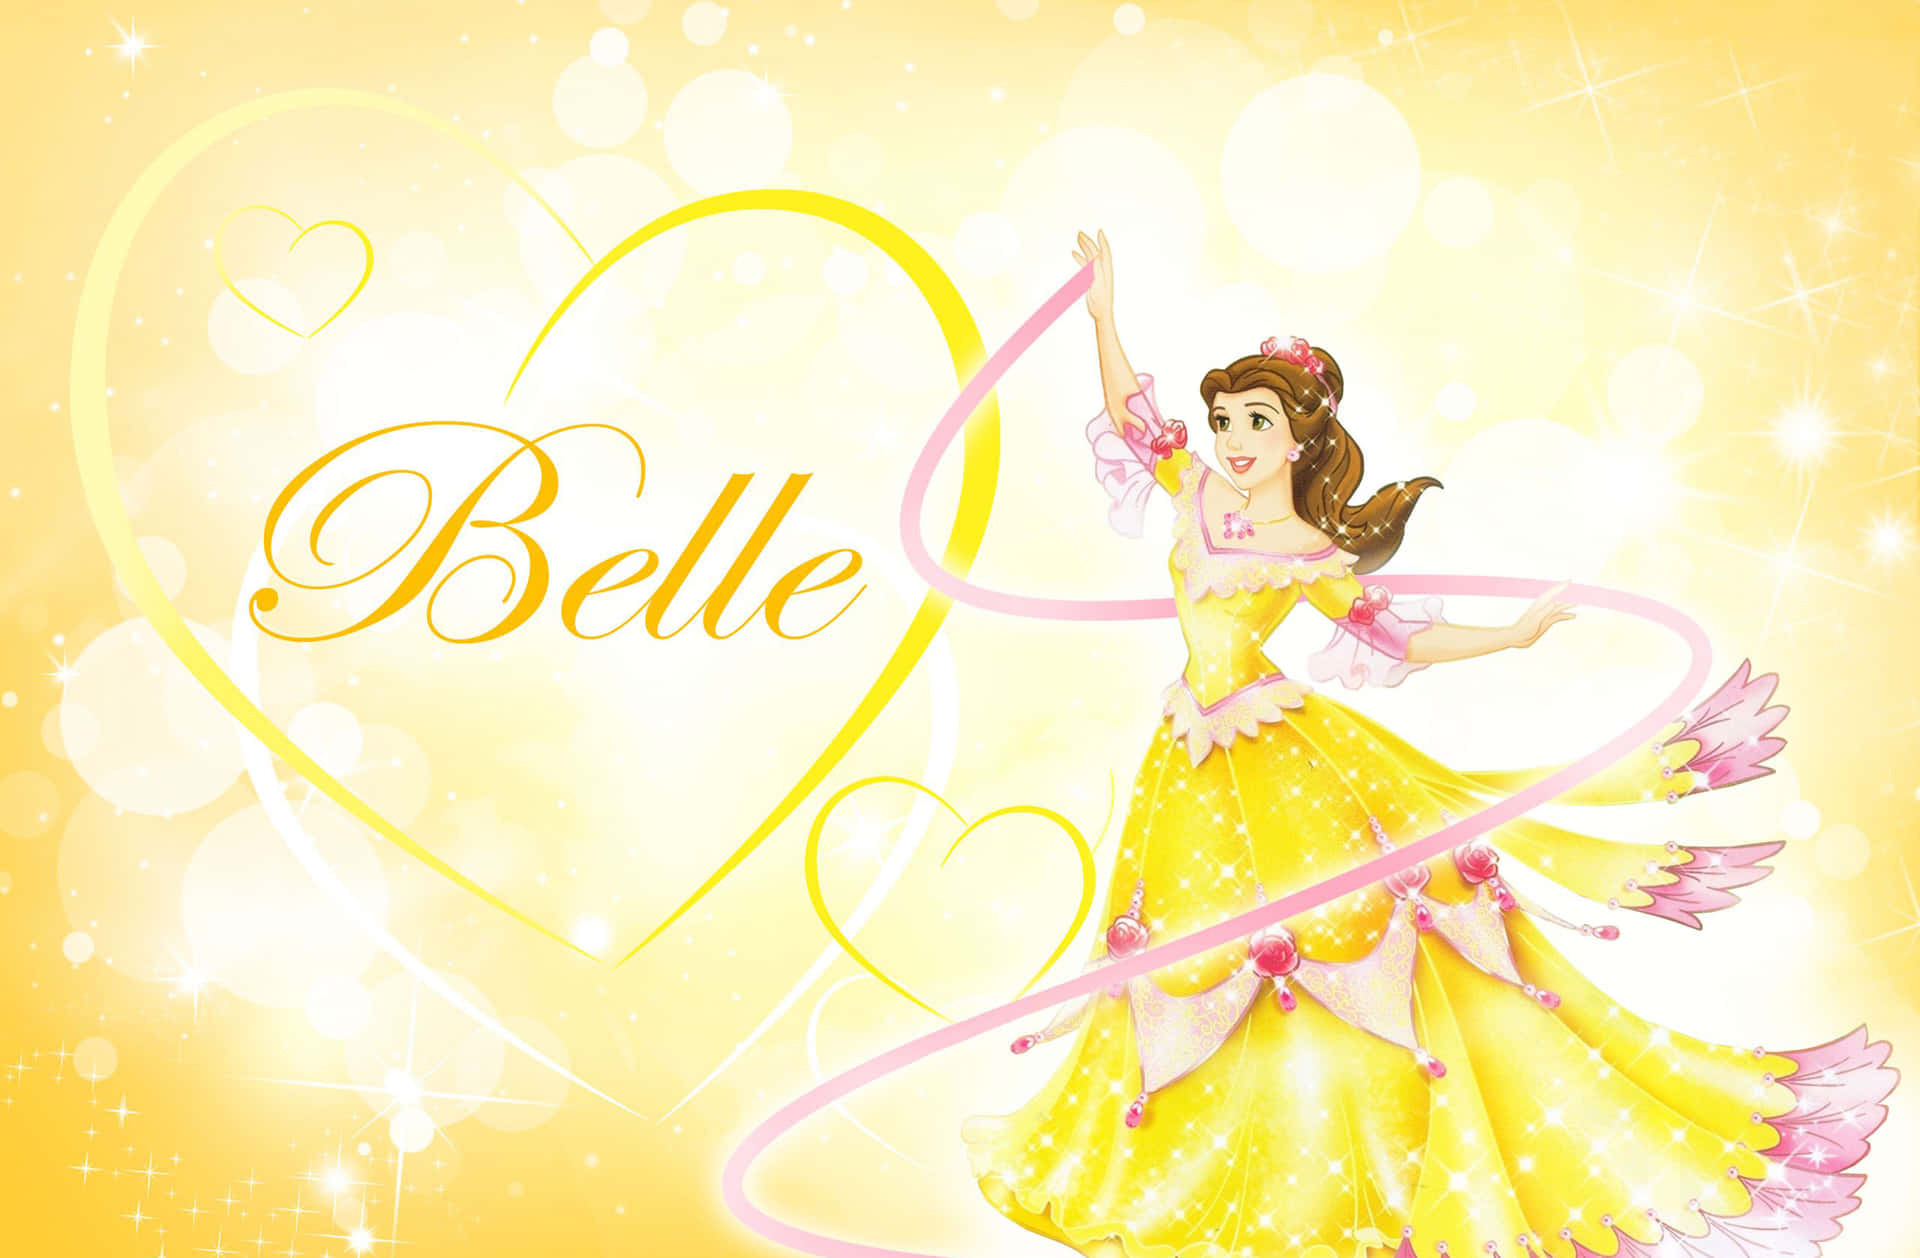 Four of the most beloved Disney princesses, Cinderella, Snow White, Jasmin and Belle